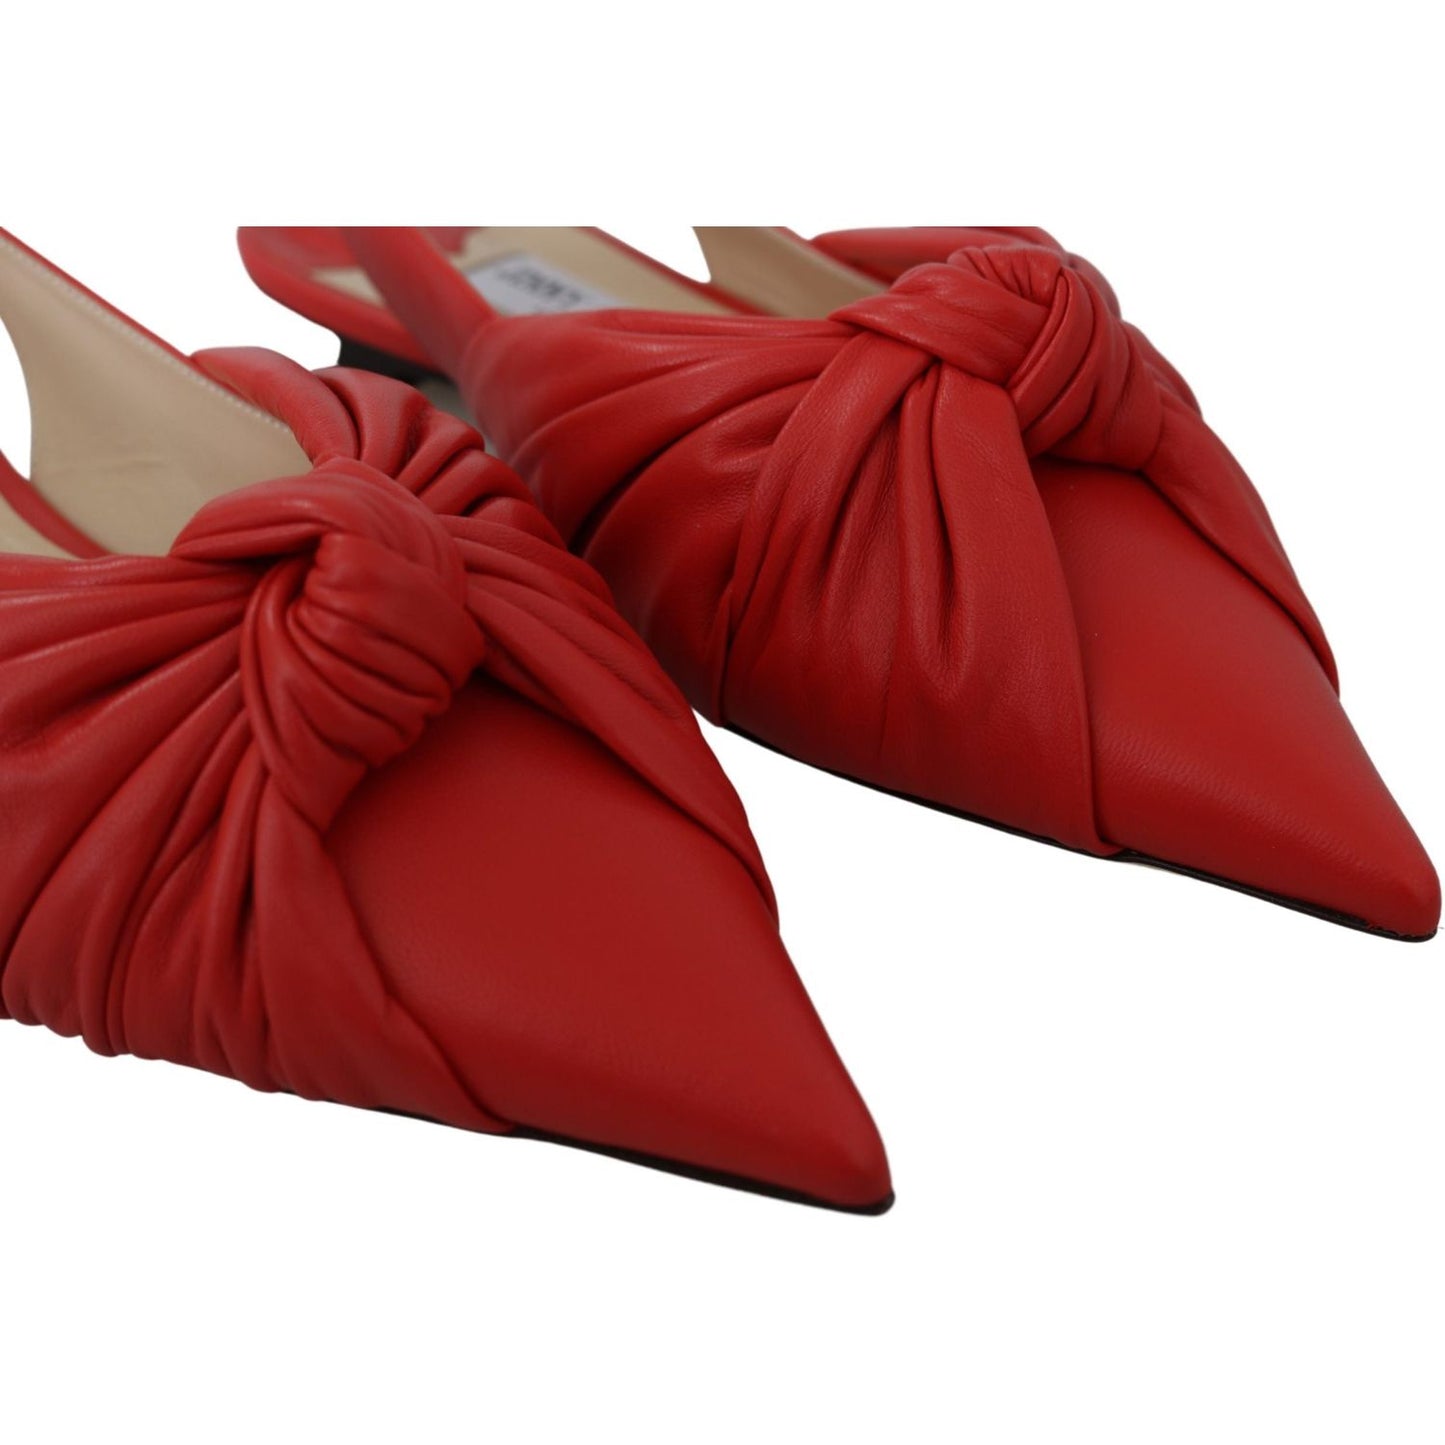 Jimmy Choo Chic Red Pointed Toe Leather Flats Shoes annabell-flat-nap-chilli-leather-flat-shoes